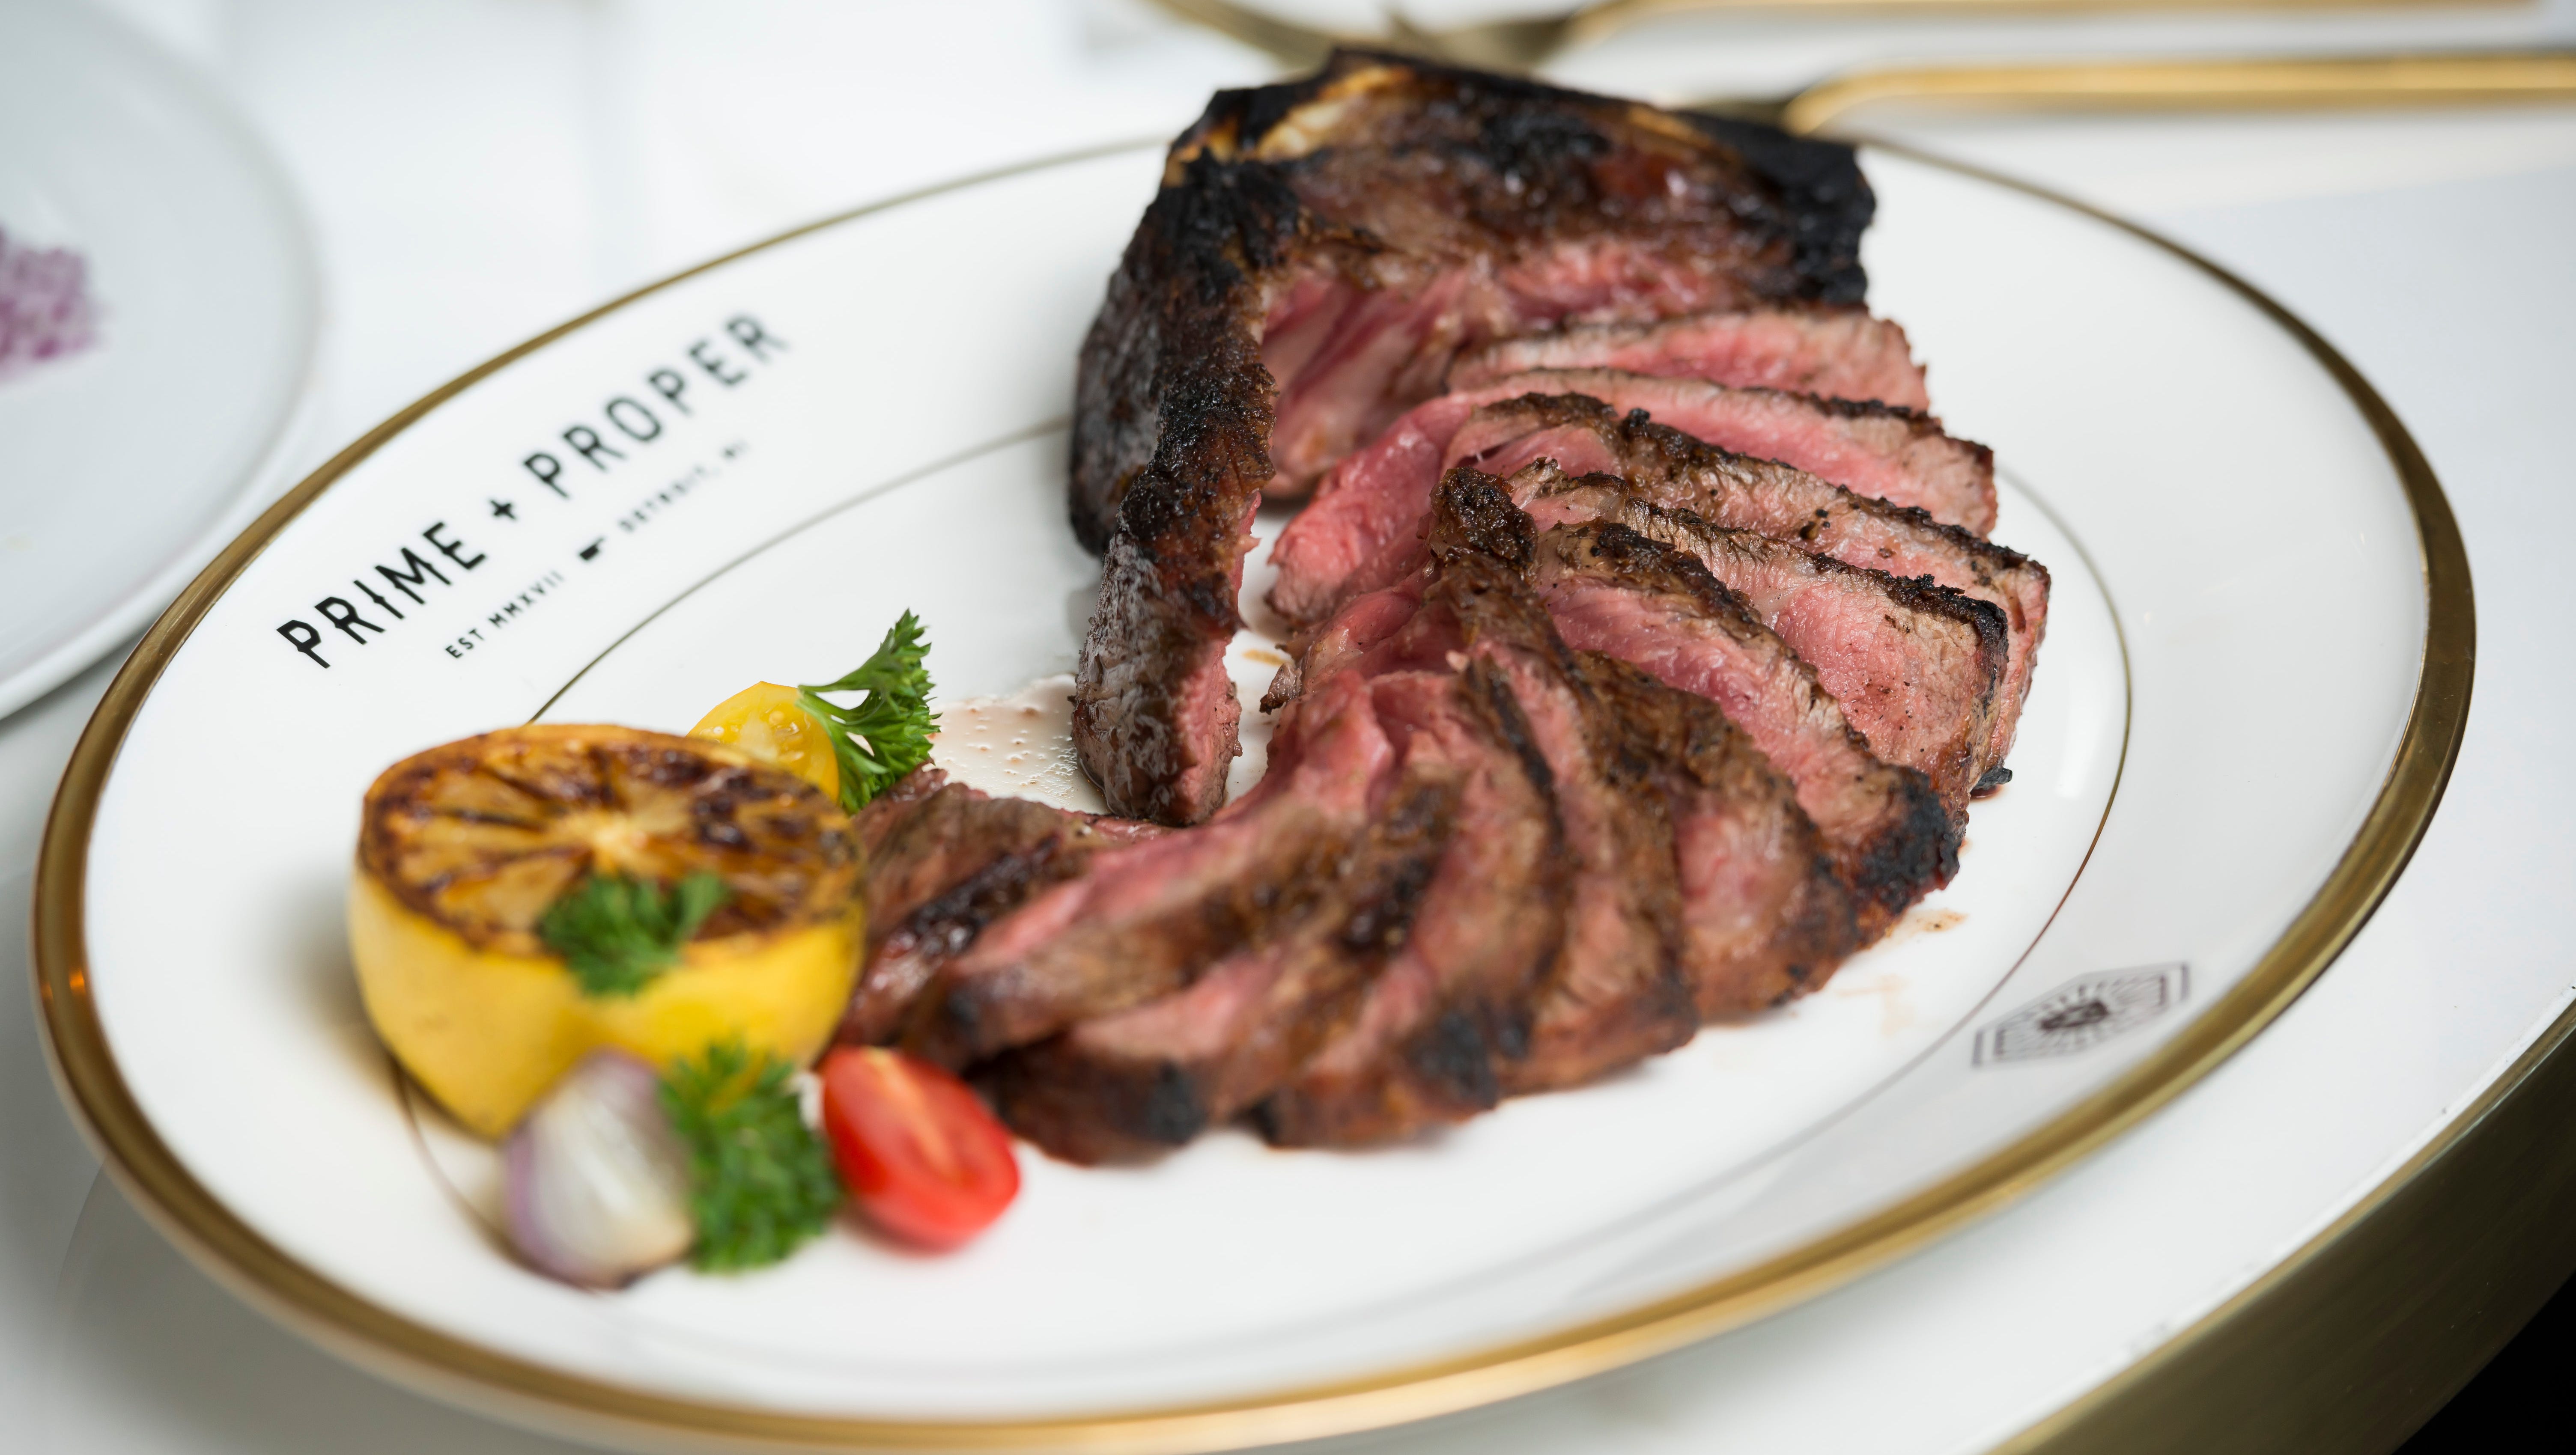 The Kansas City strip bone-in sirloin is one of the menu items at the recently opened Prime and Proper restaurant in downtown Detroit.